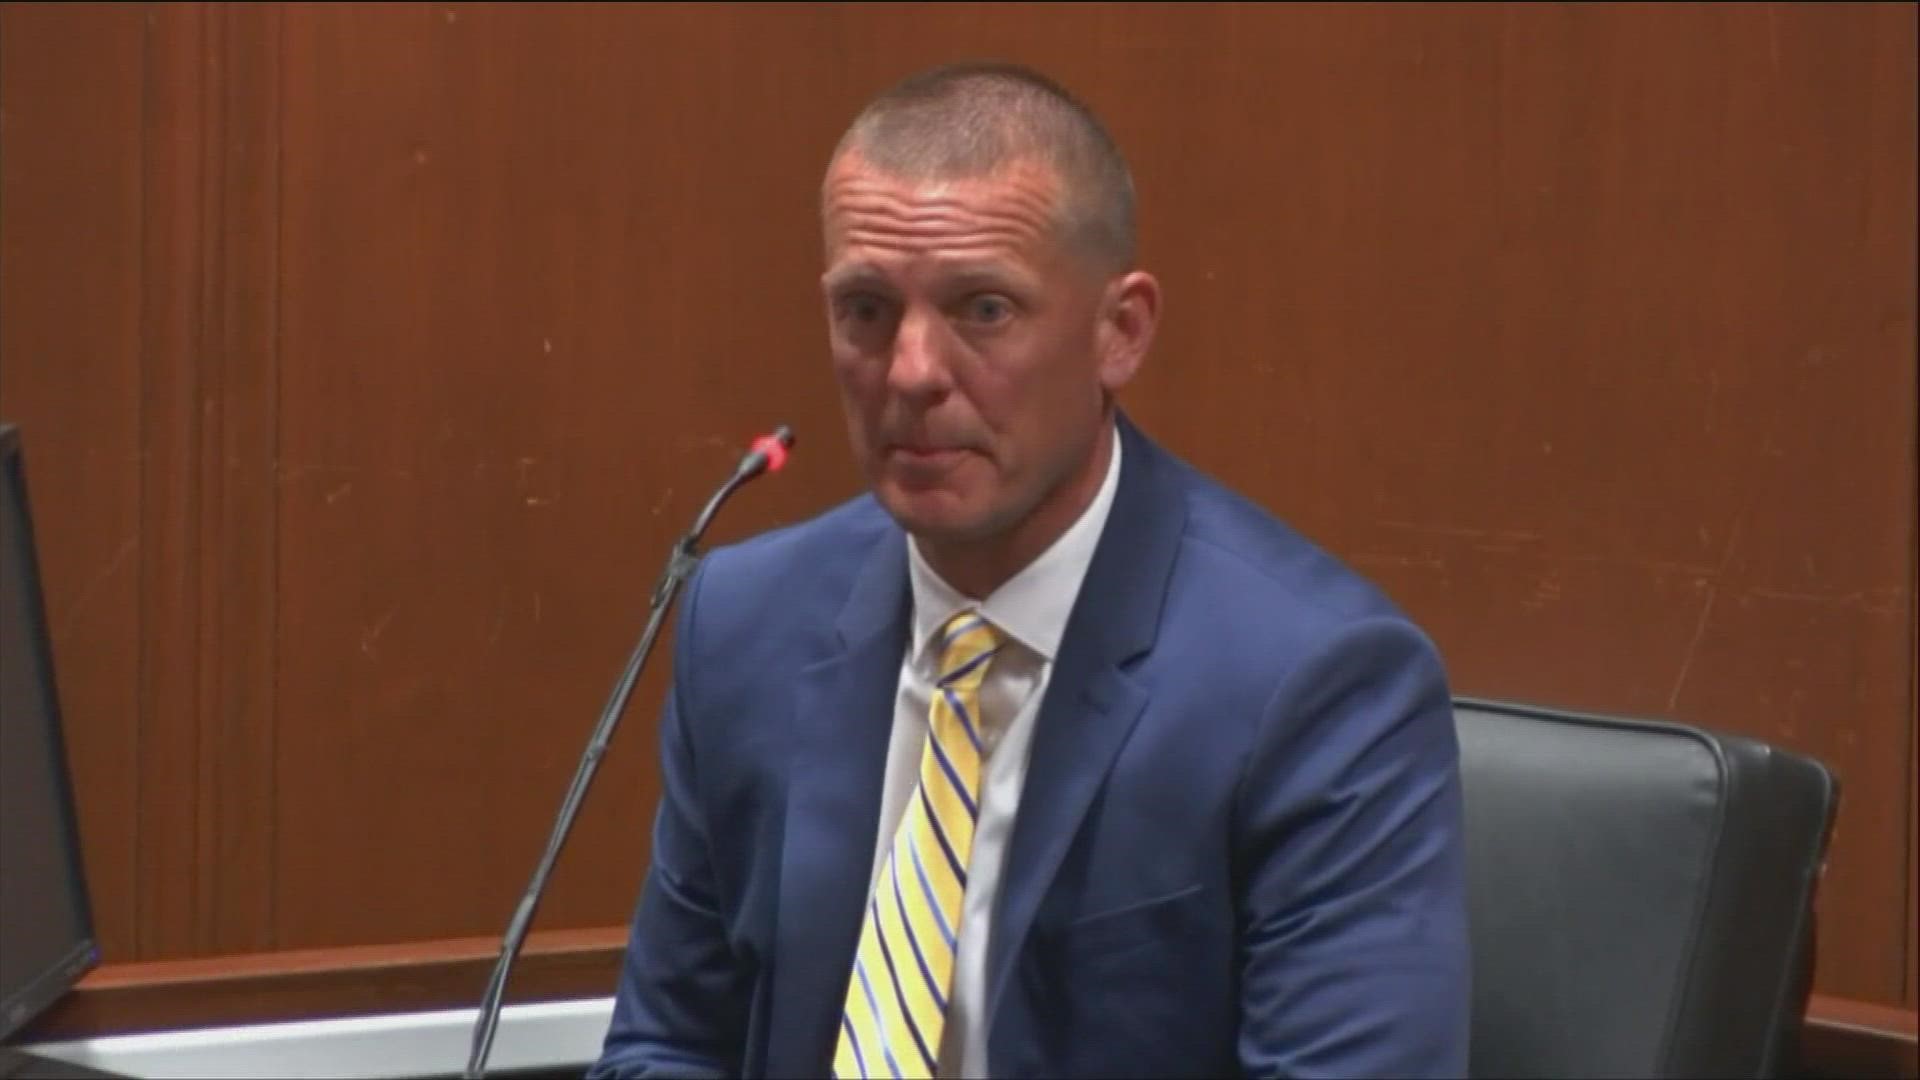 Special Agent Mike Fischels testified Thursday, May 20 in the Scott County trial of Cristhian Bahena Rivera. Bahena Rivera is accused of killing Mollie Tibbetts.